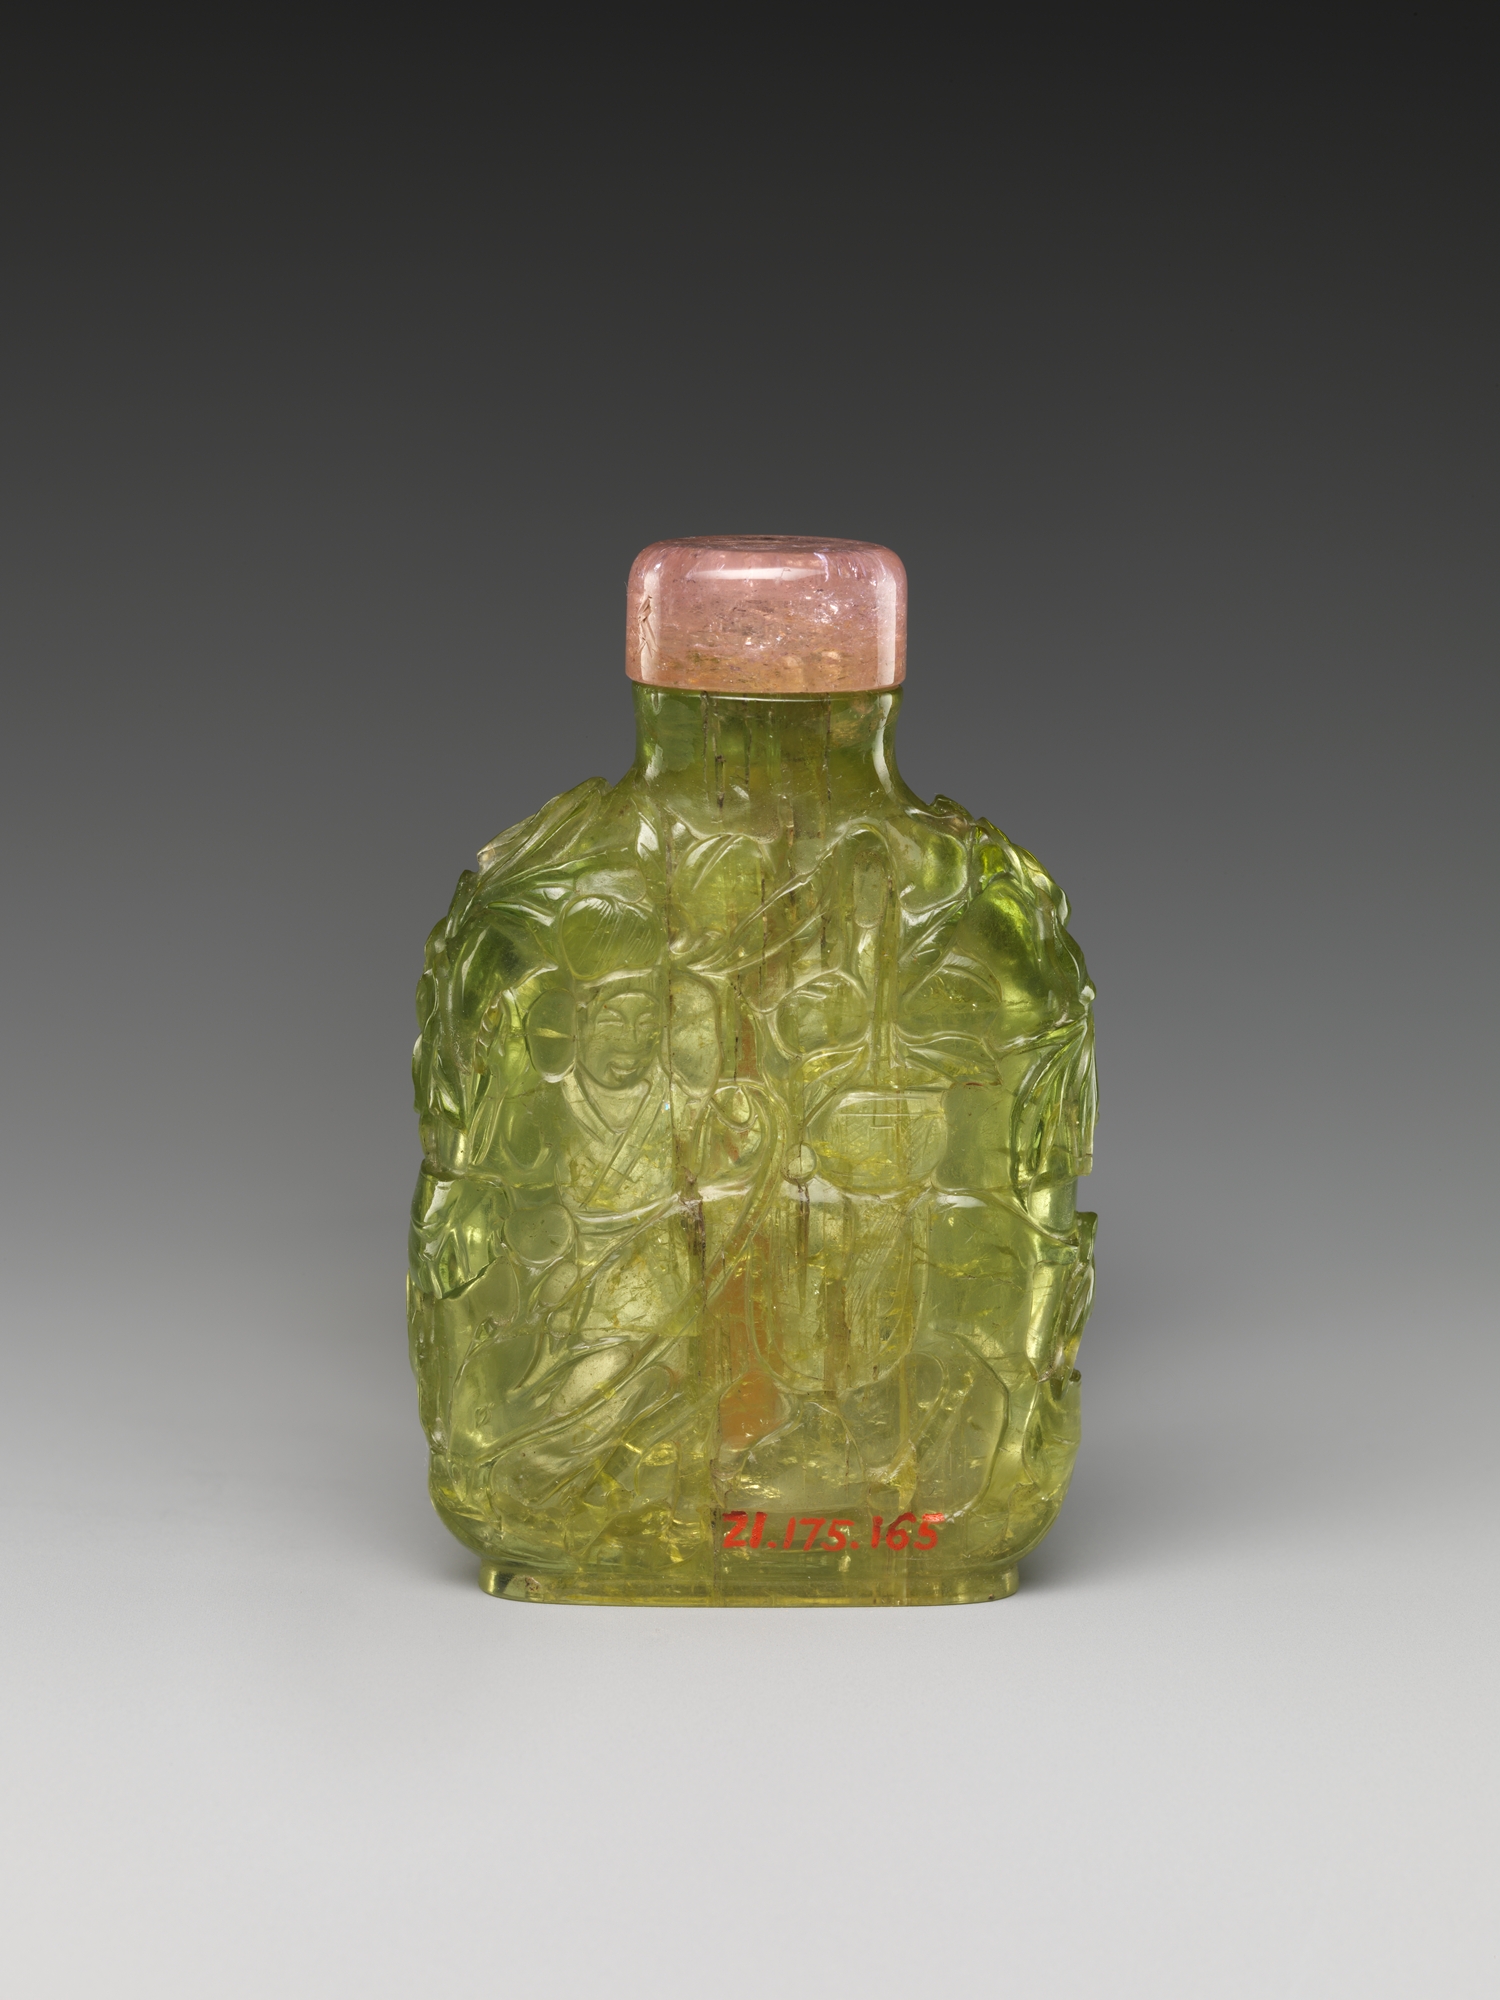 Small Delights: Chinese Snuff Bottles